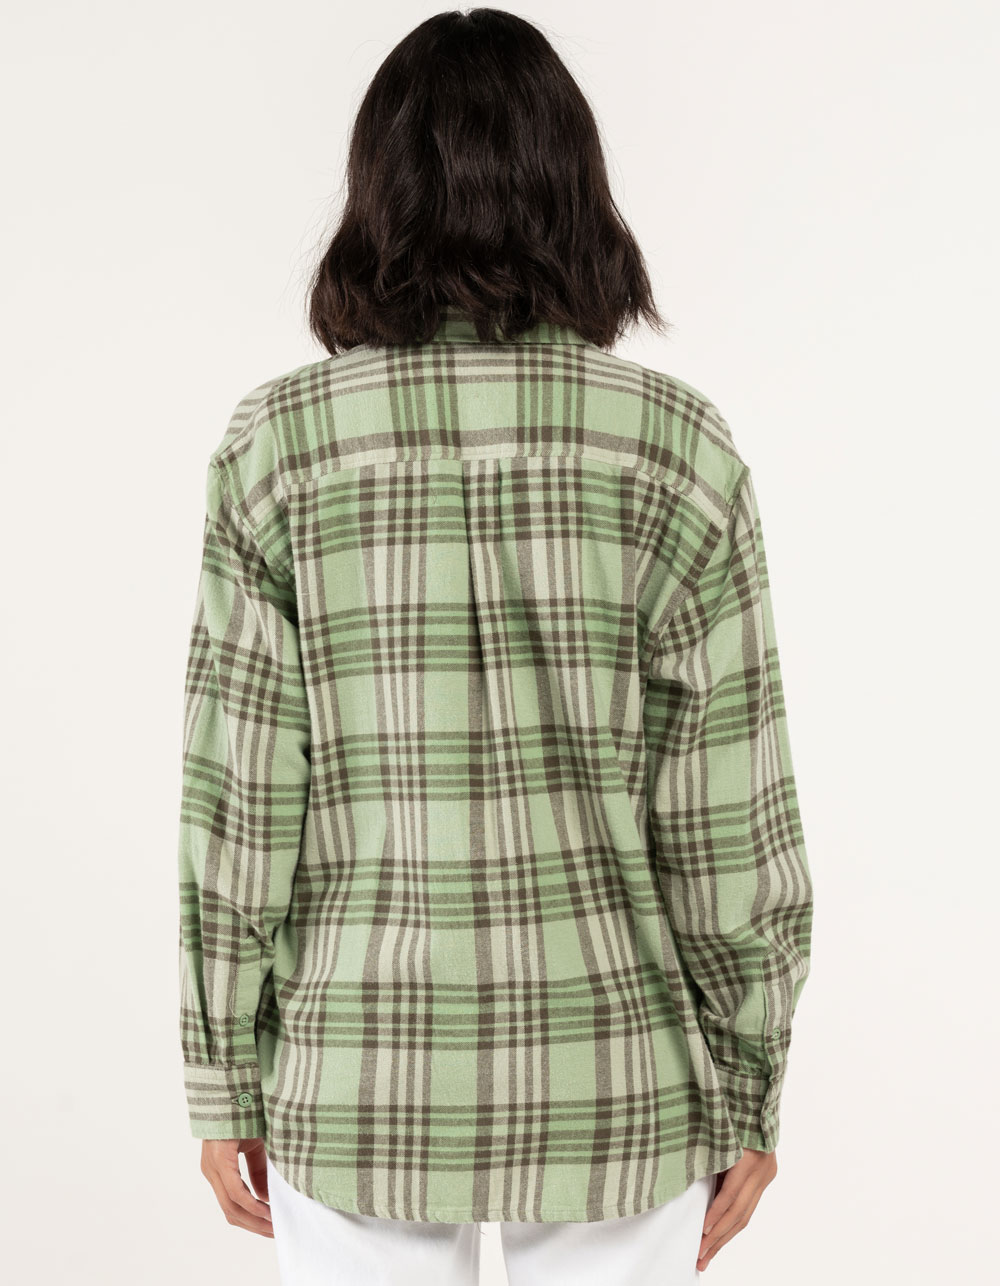 A Lost Cause Back on Olive Green Flannel Shirt - Size S - Green - Flannels - Shirts at Zumiez